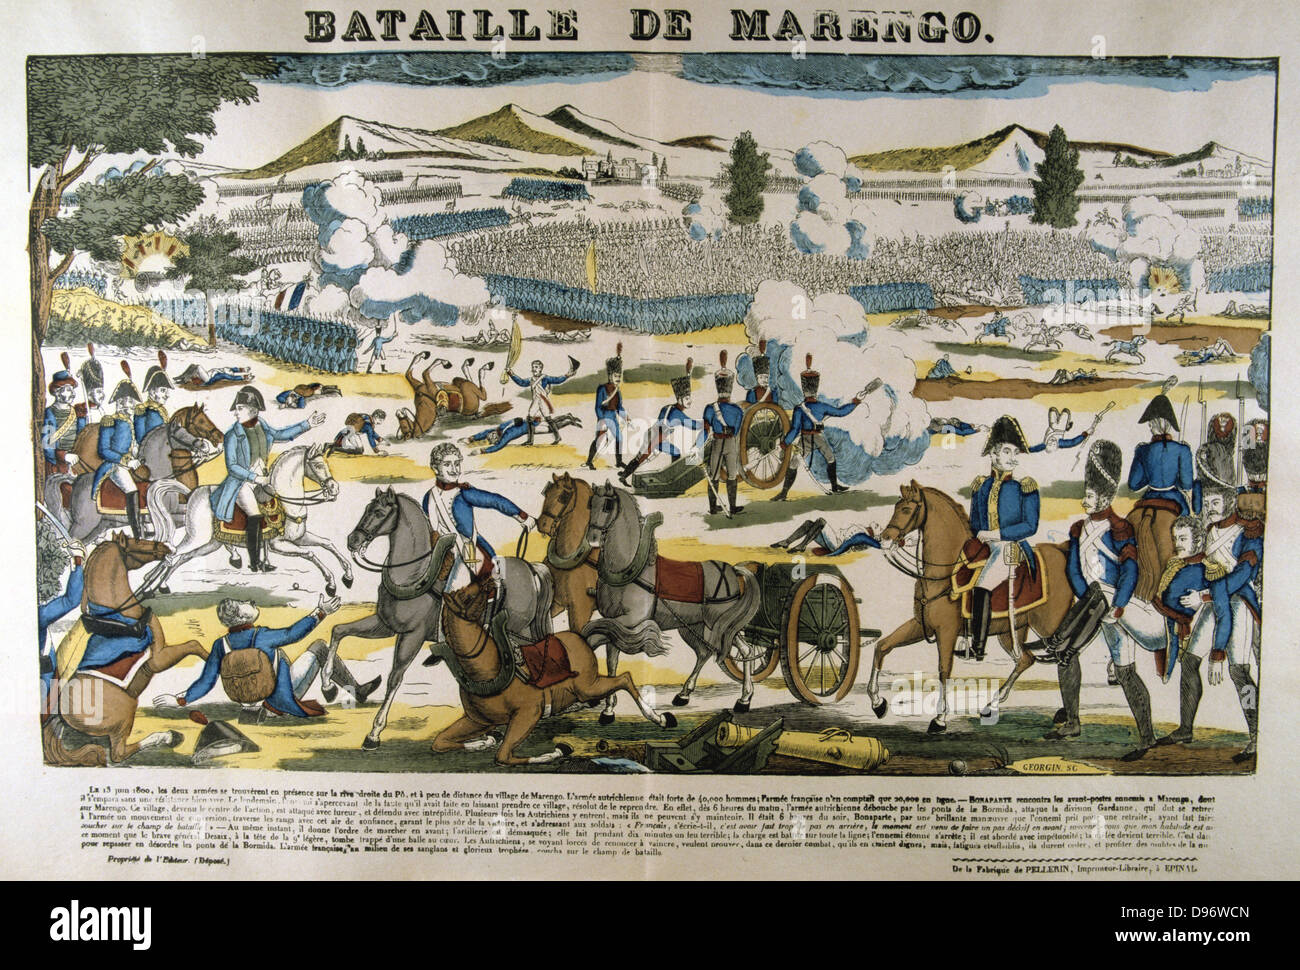 Bonparte, centre left, at the Battle of Marengo, 14 June 1800. French forces under Napoleon defeated Austrians. Popular French hand-coloured woodcut. Stock Photo